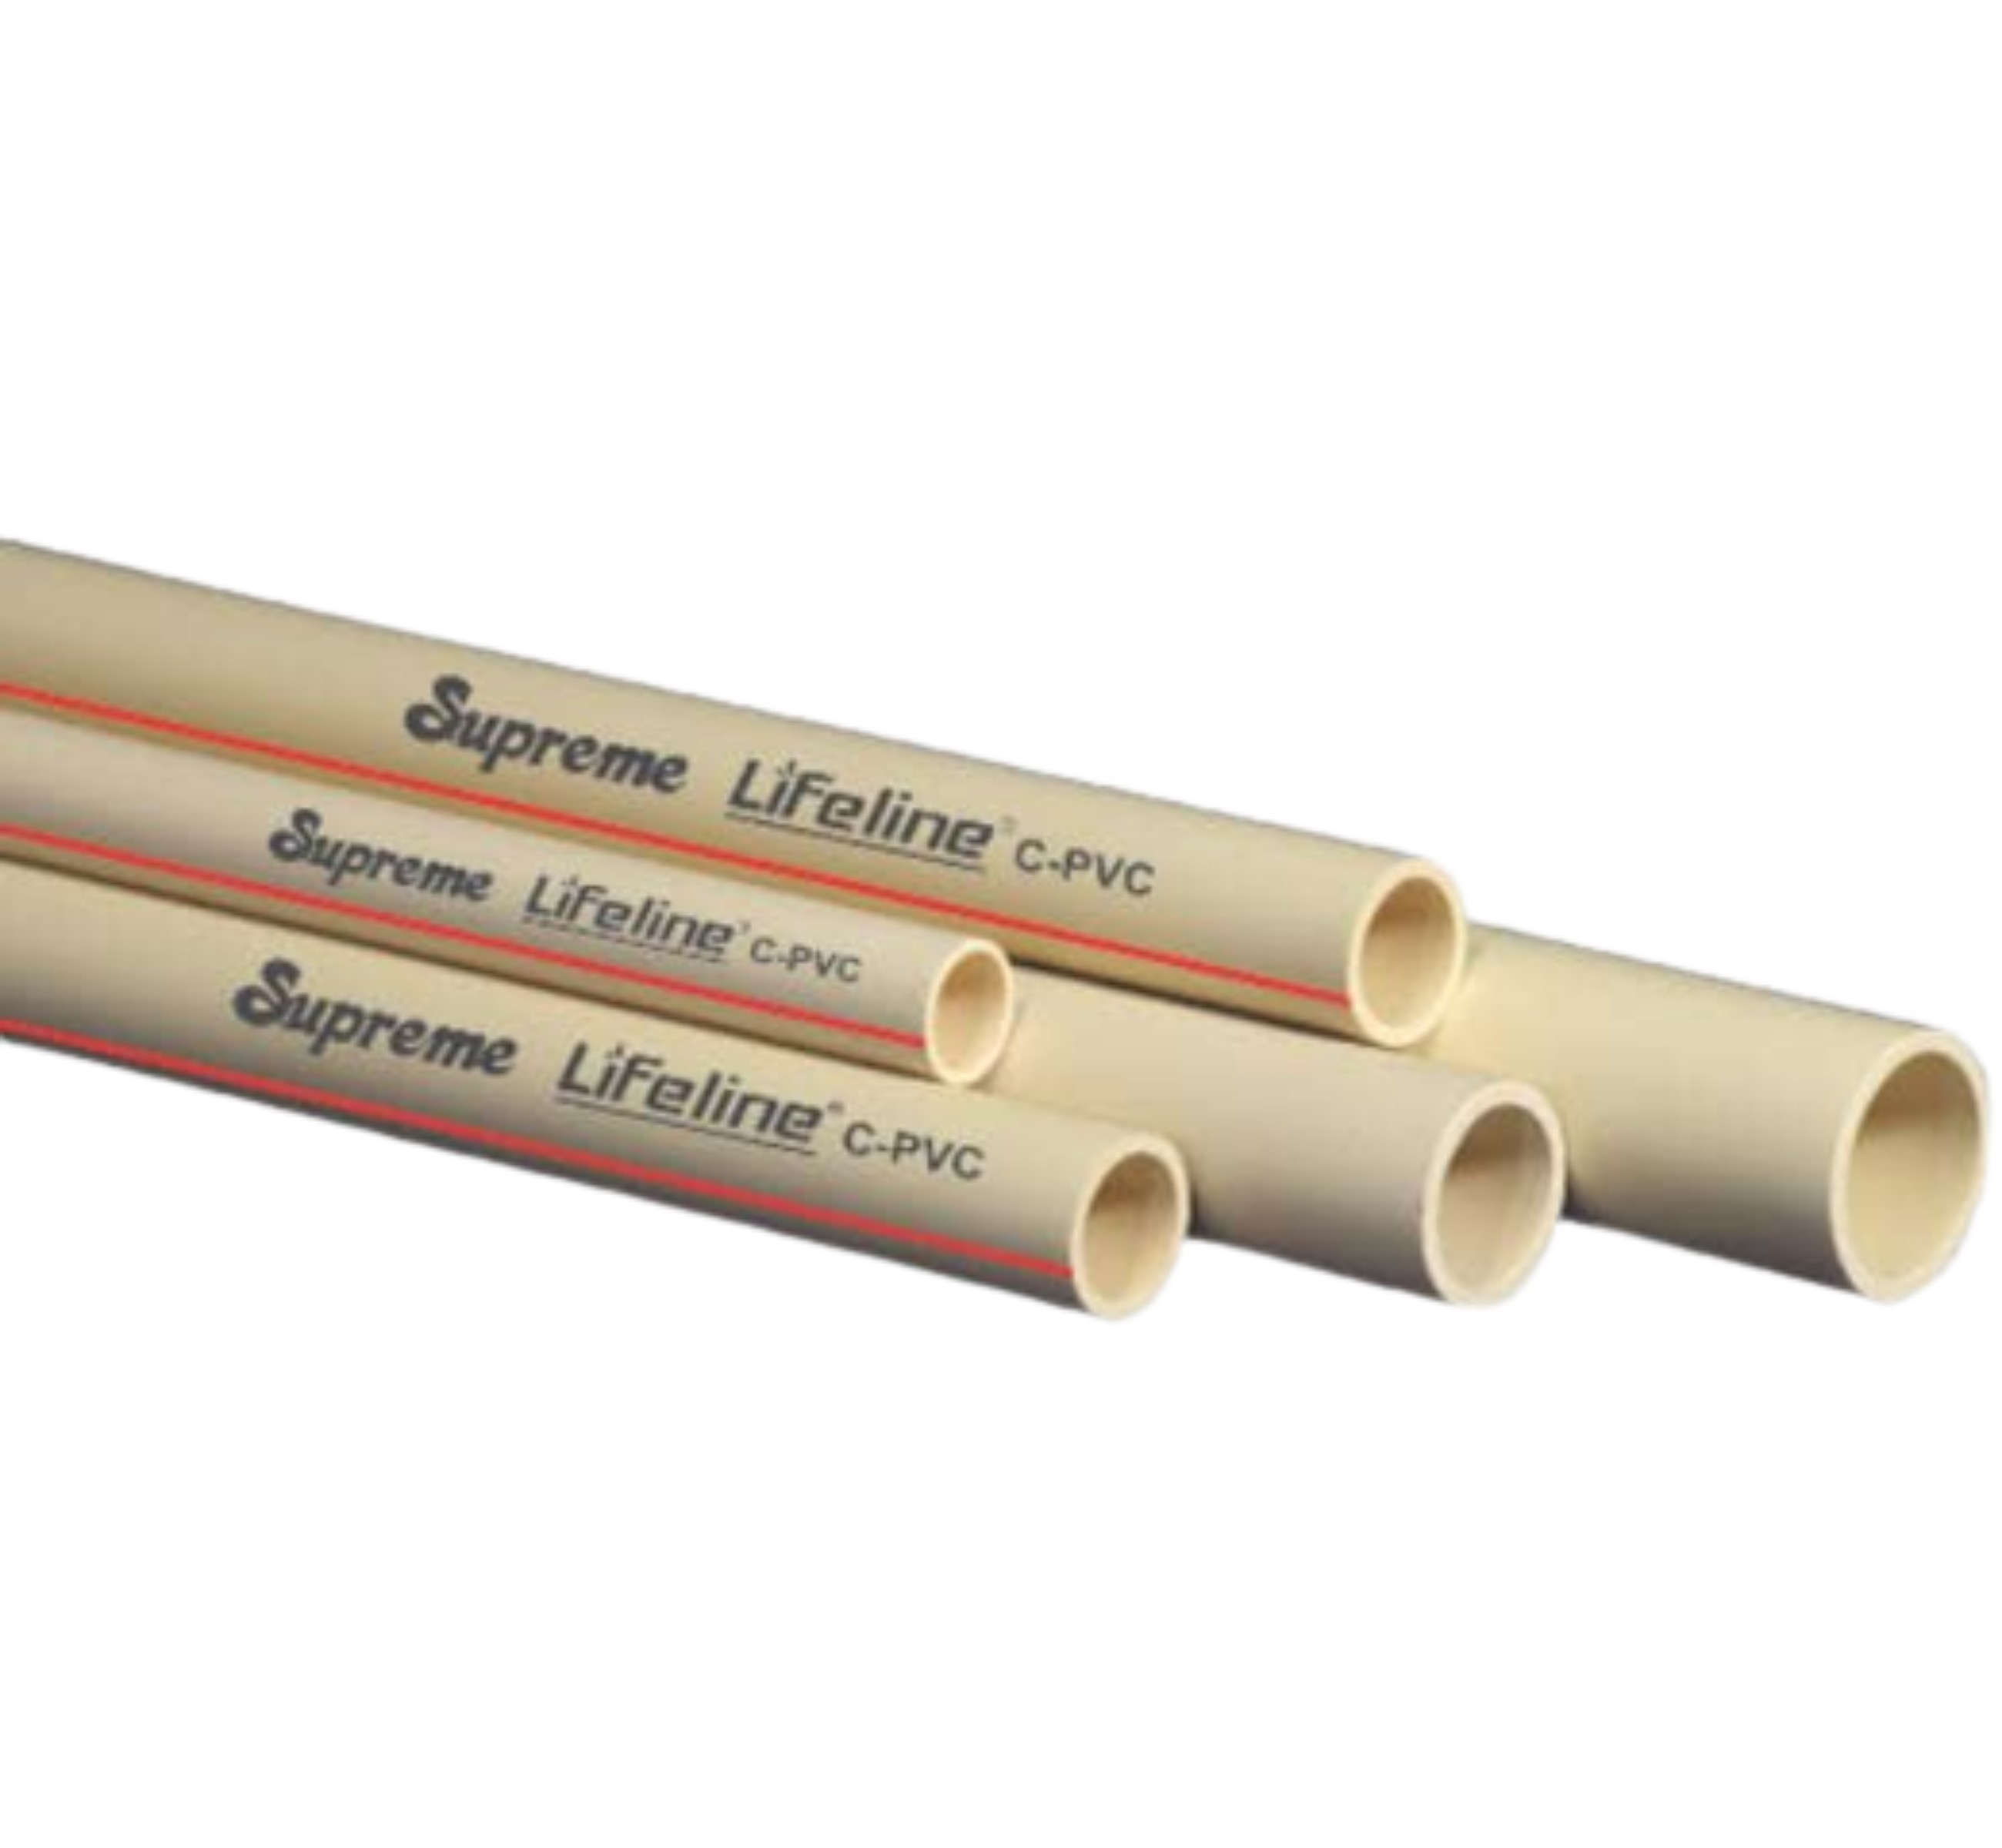 Supreme Industries hits 52-week high on buying PVC pipes business for Rs  235 crore